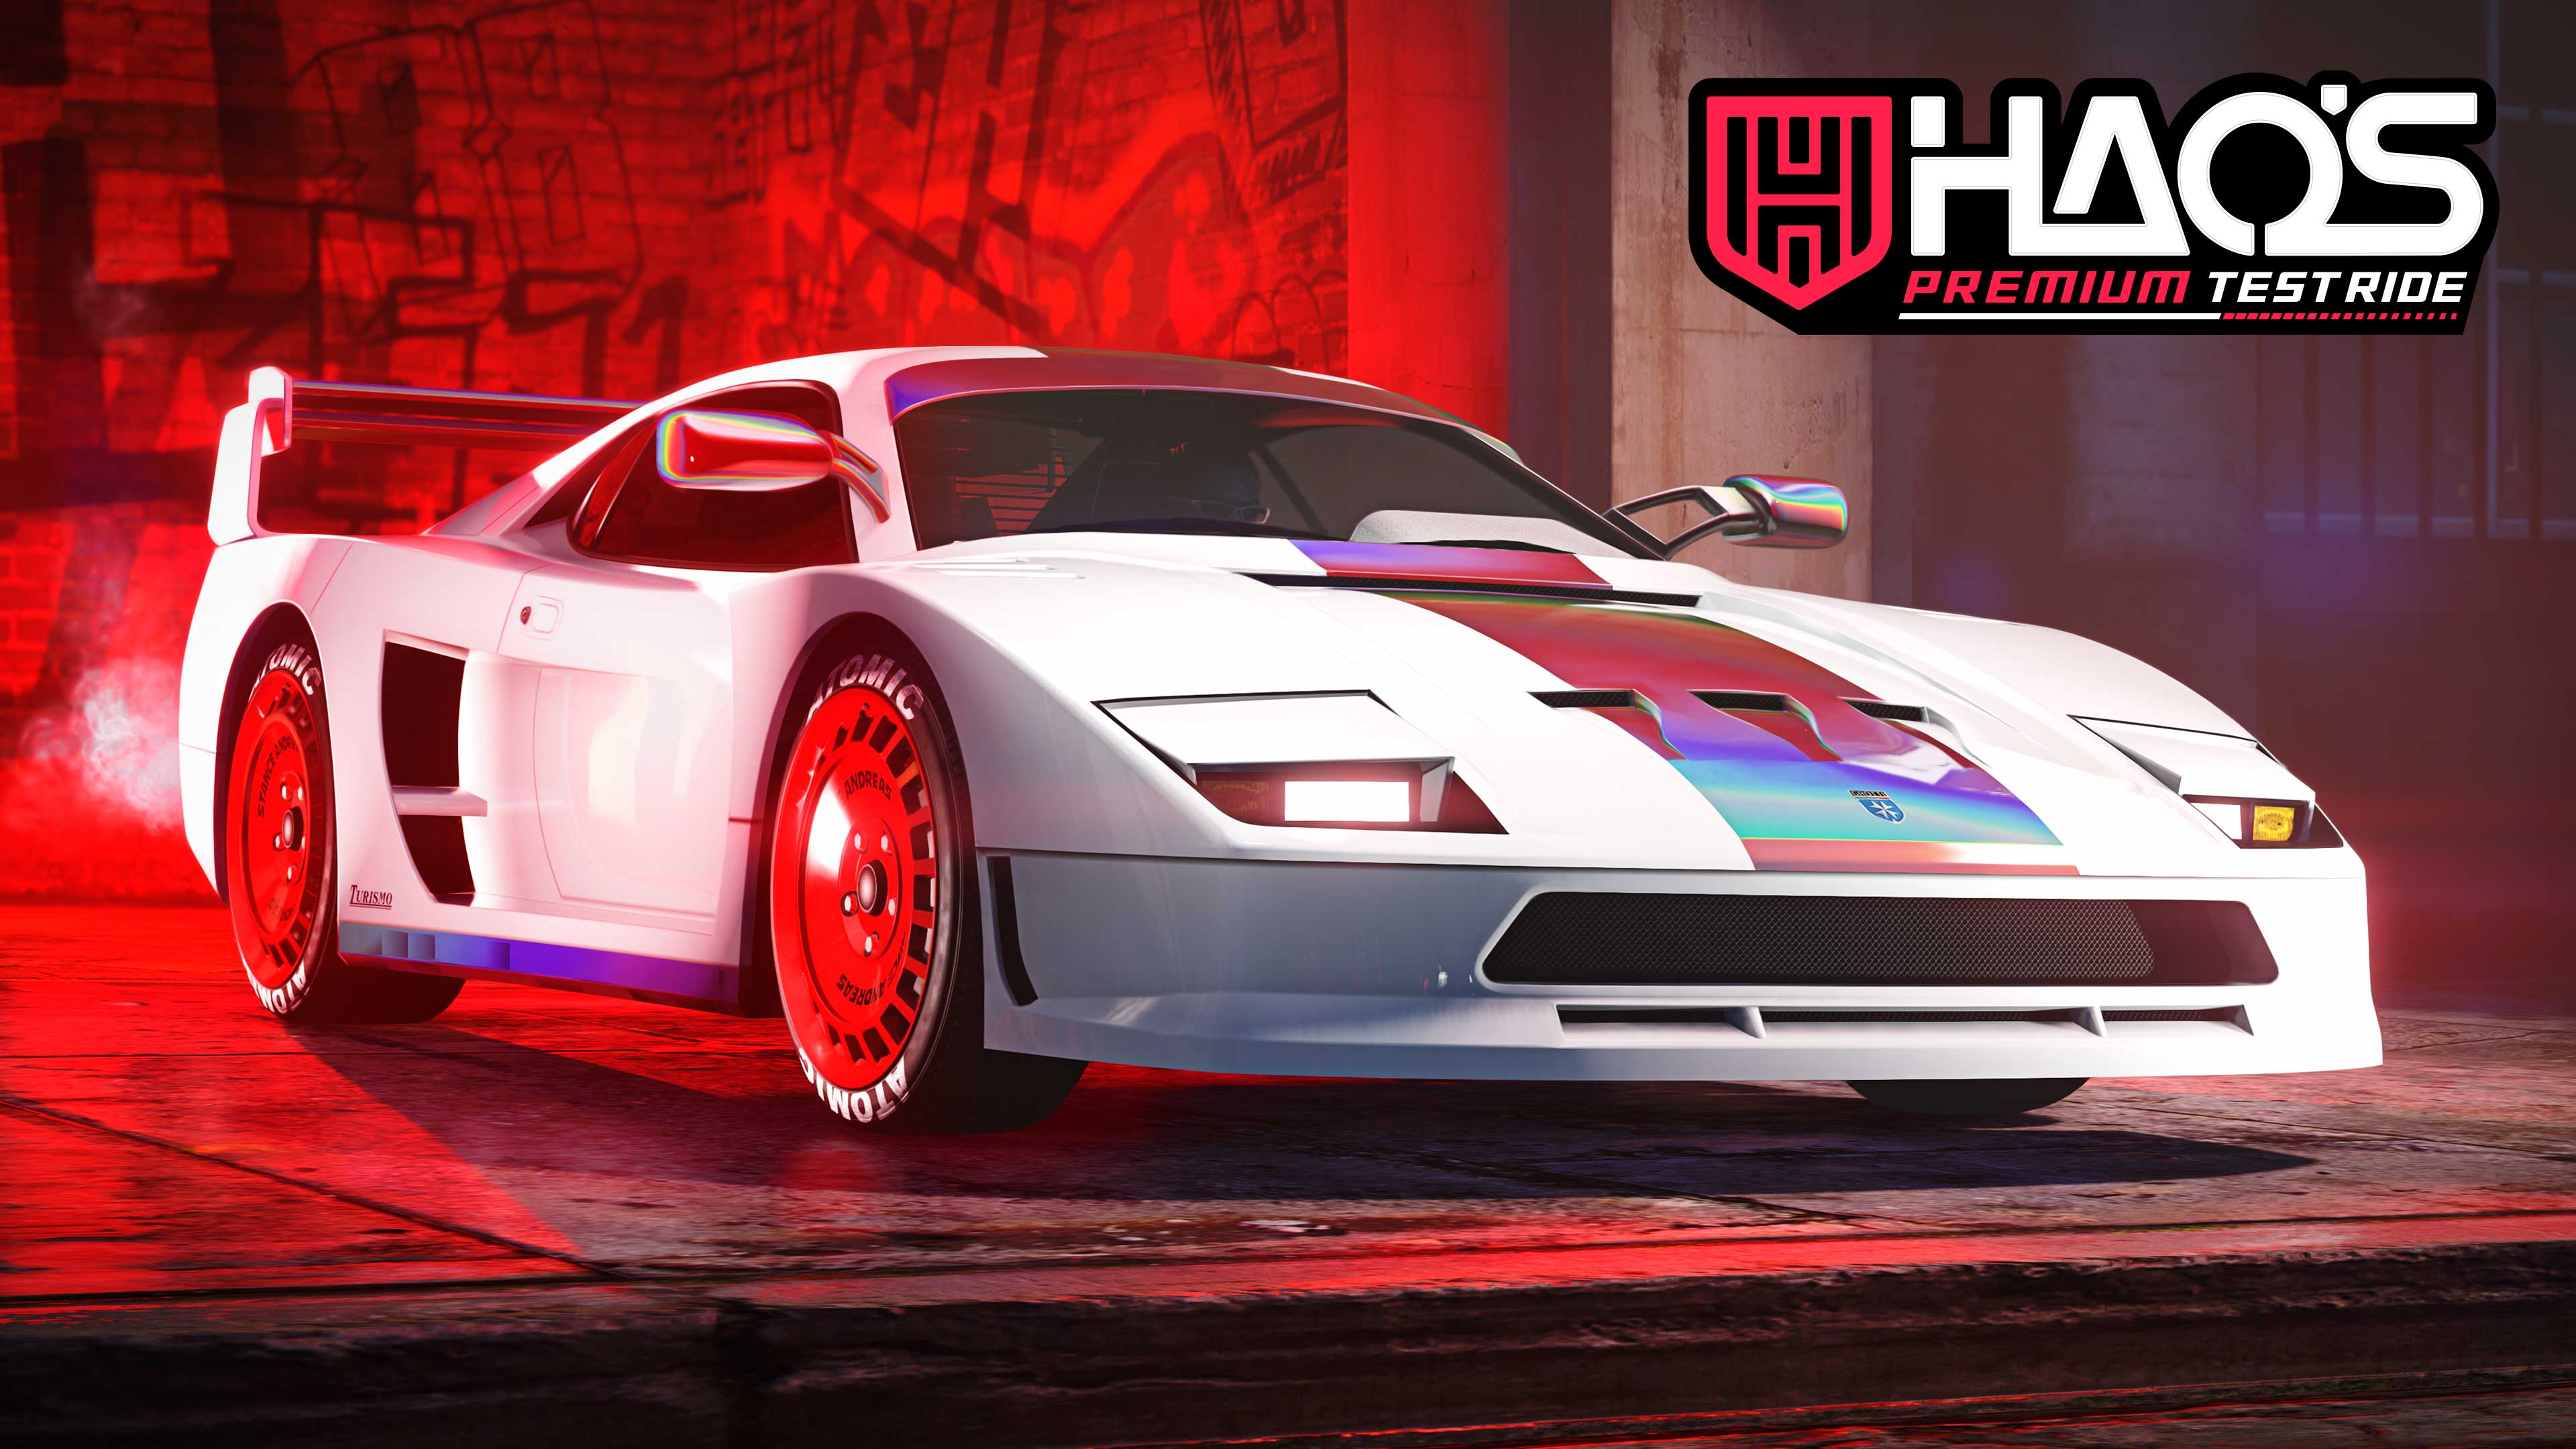 GTA News 🔴 RockstarINTEL.com on X: The GTA Online test track vehicles you  can drive this week are the Vapid Chino, the Grotti Turismo Classic and the  Bravado Gauntlet Hellfire. Full Event